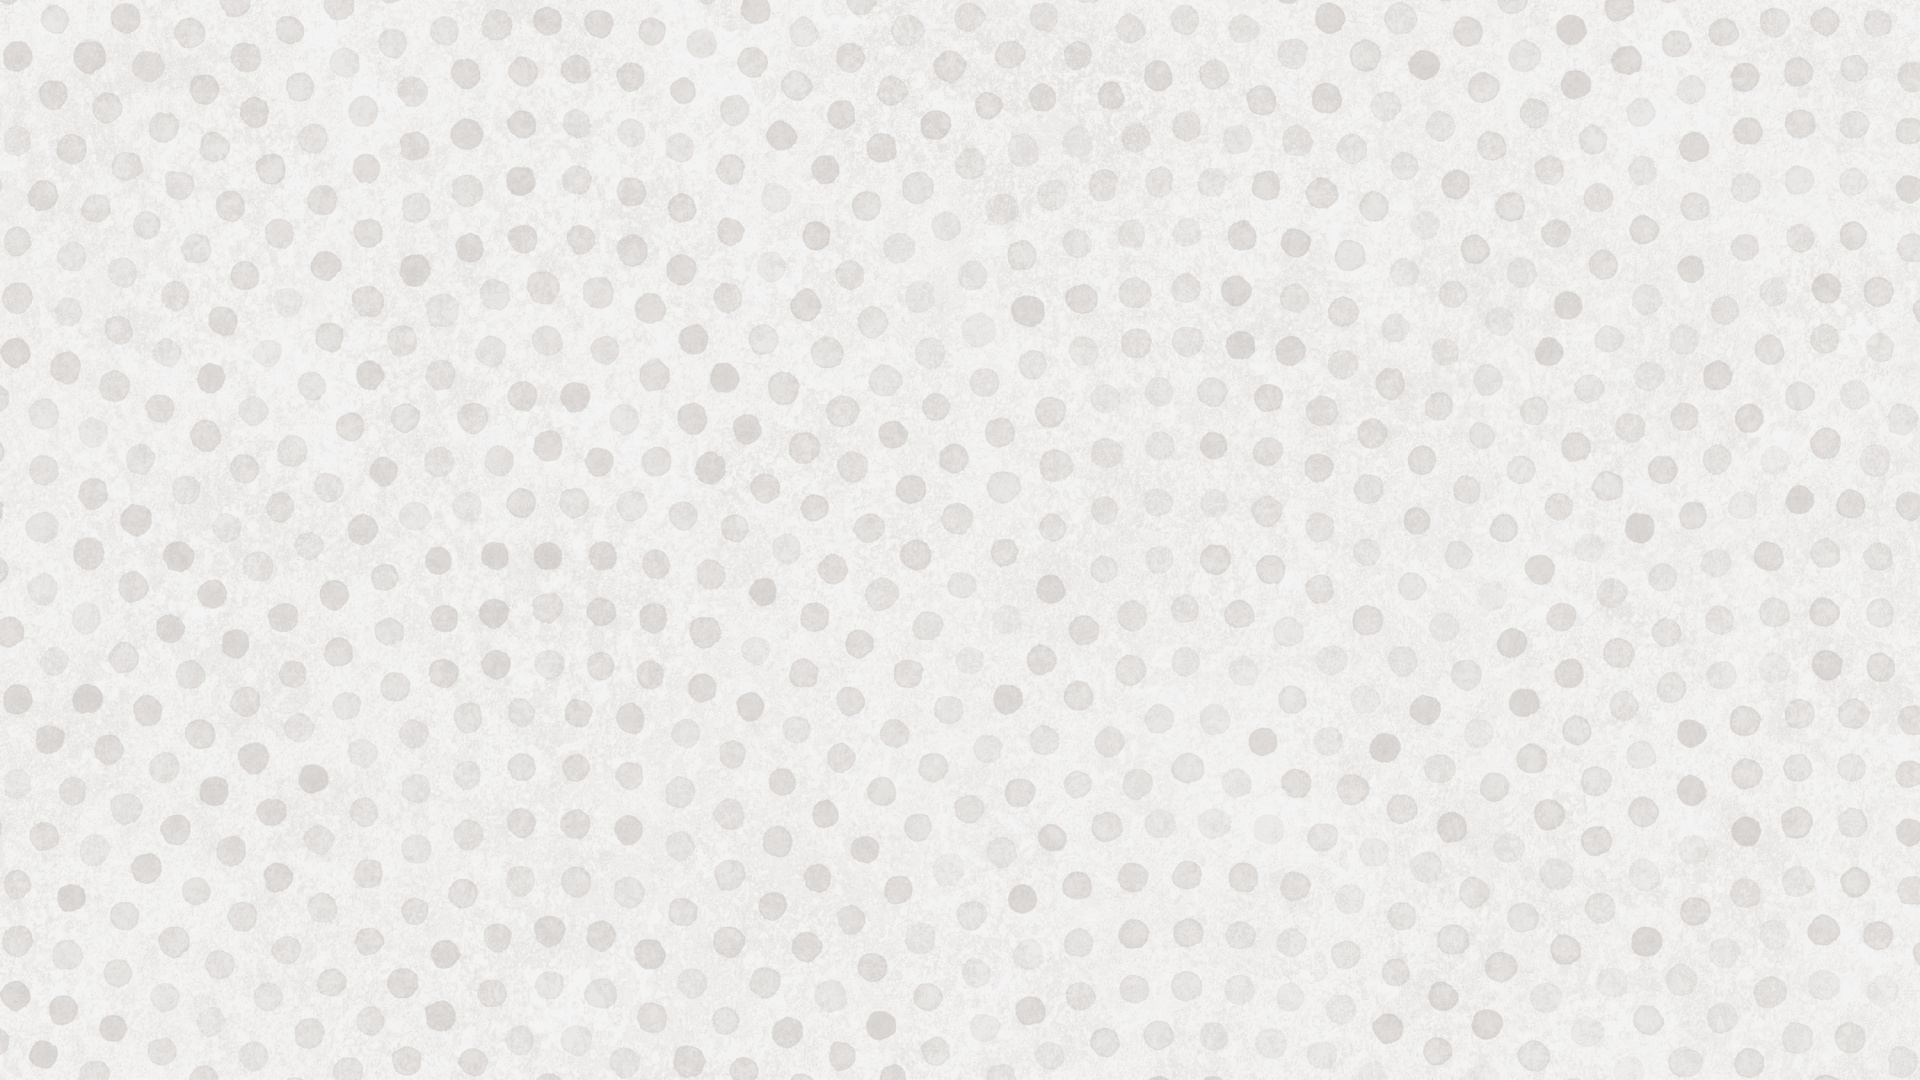 White and Black Polka Dot Textile. Wallpaper in 1920x1080 Resolution